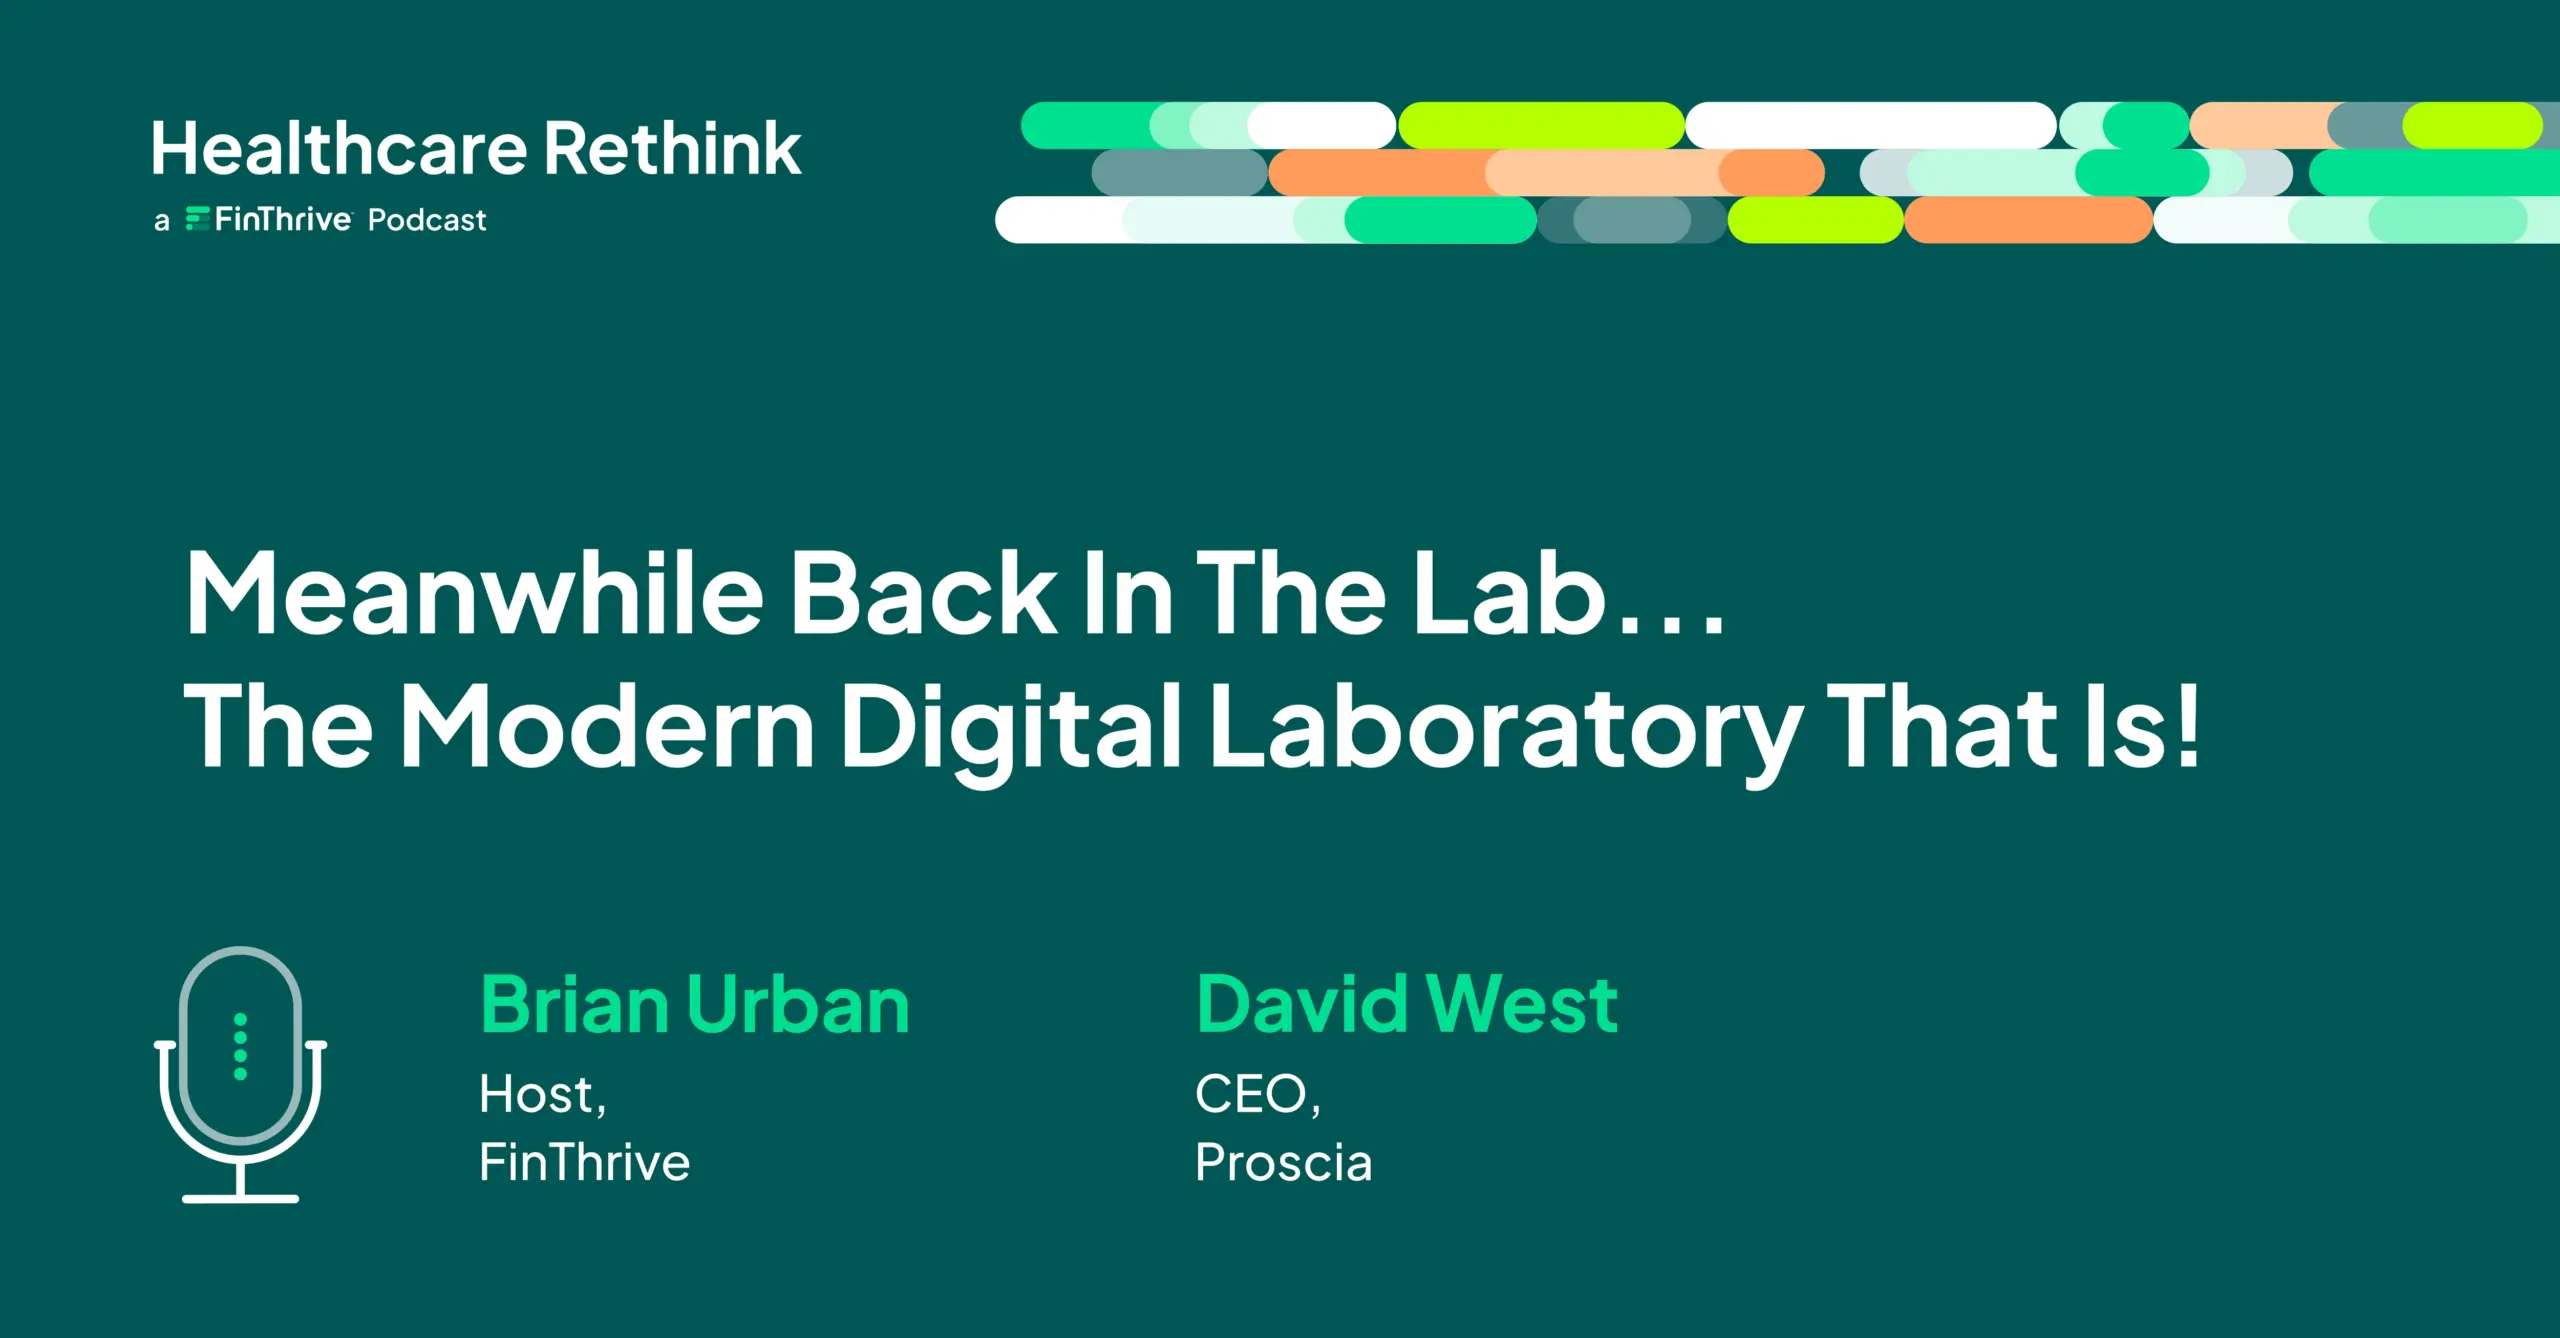 Meanwhile Back in The Lab…The Modern Digital Laboratory, That is!